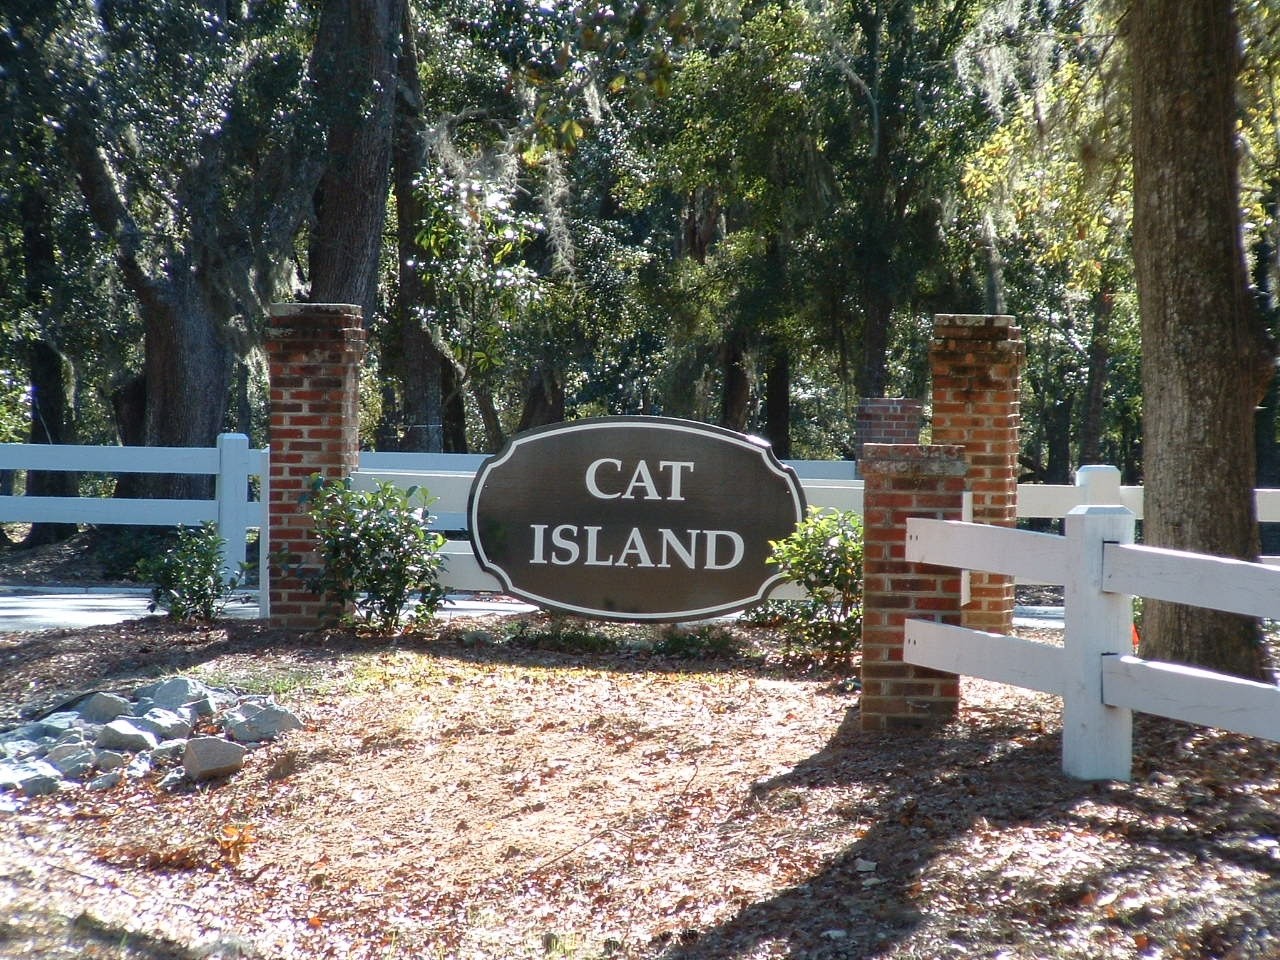 They didn't always wear clothes on Cat Island.